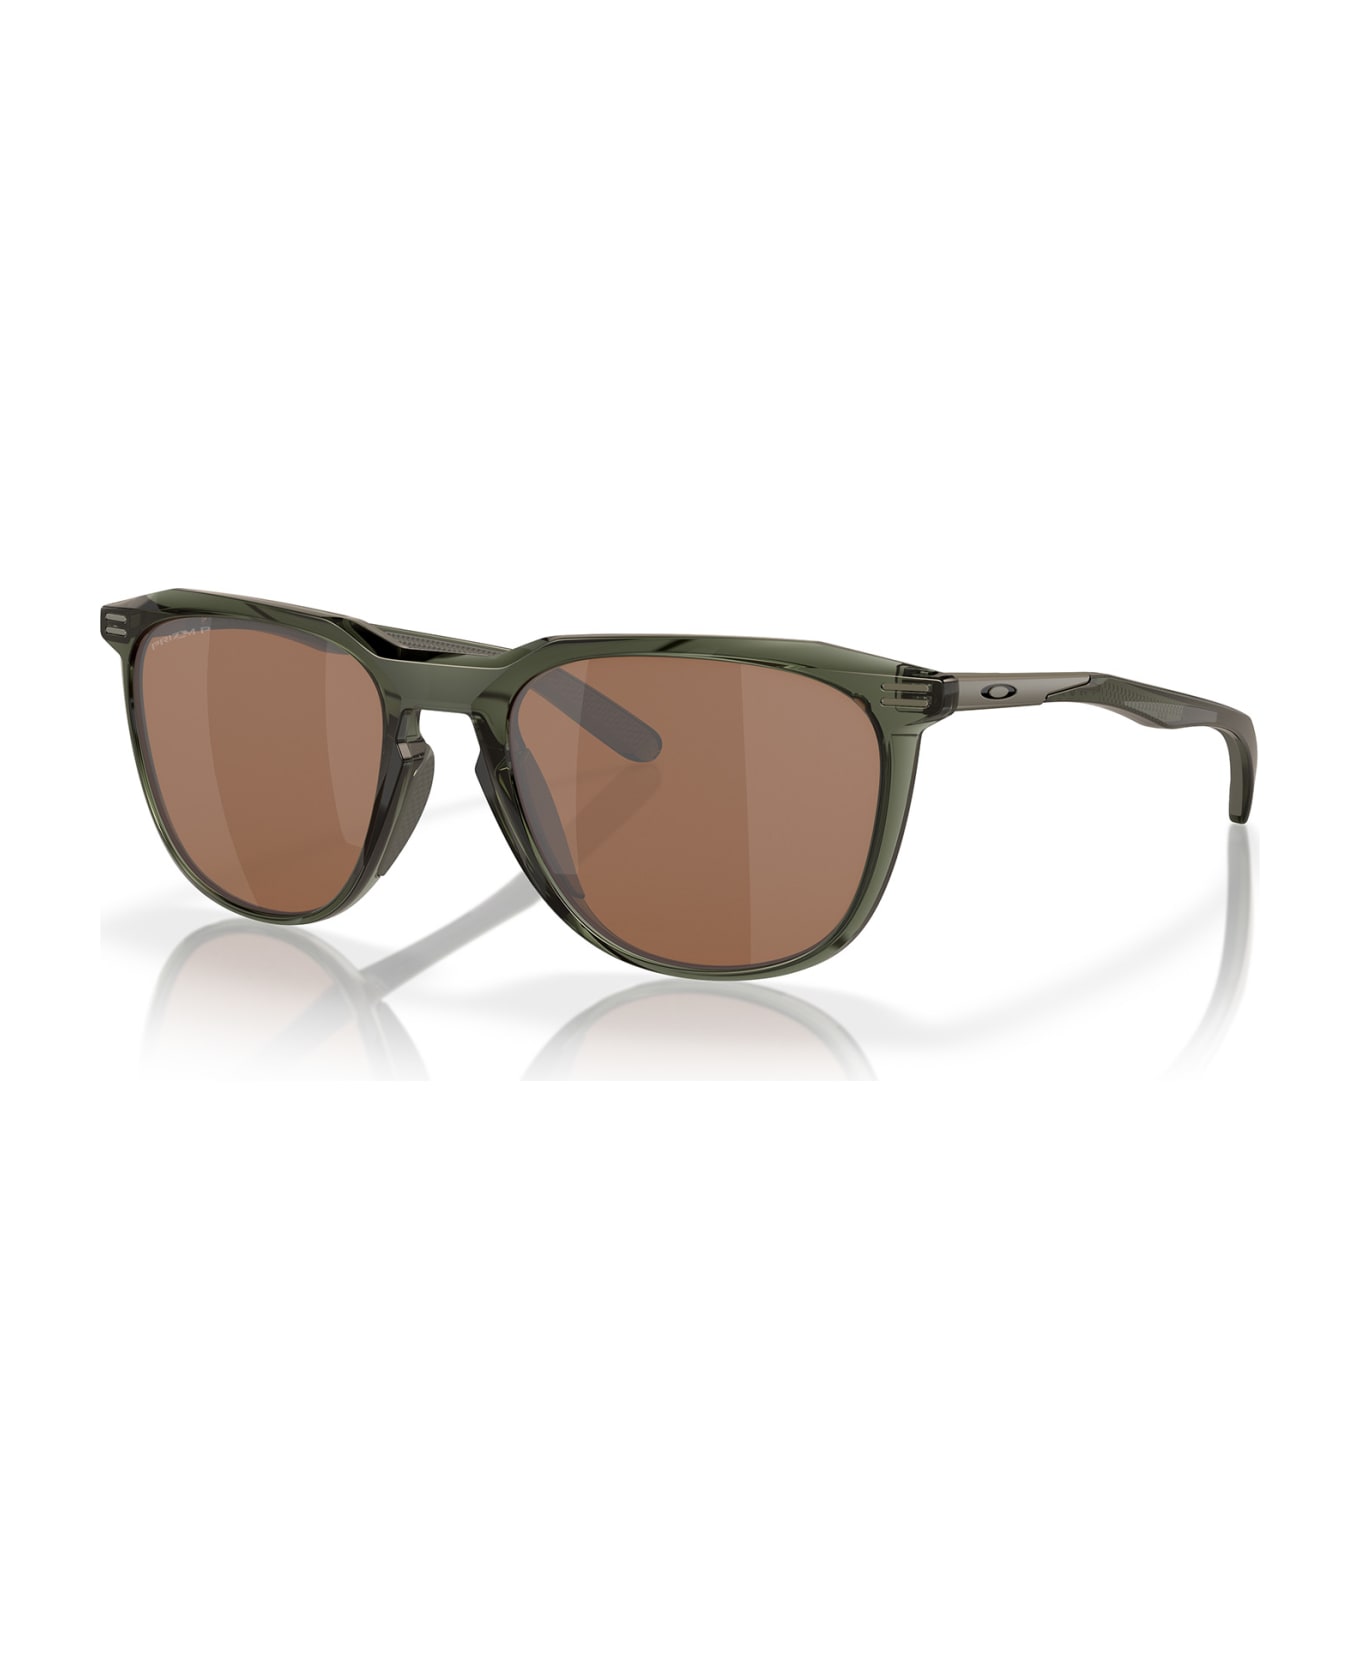 Oakley Oo9286 Olive Ink Sunglasses - Olive Ink サングラス